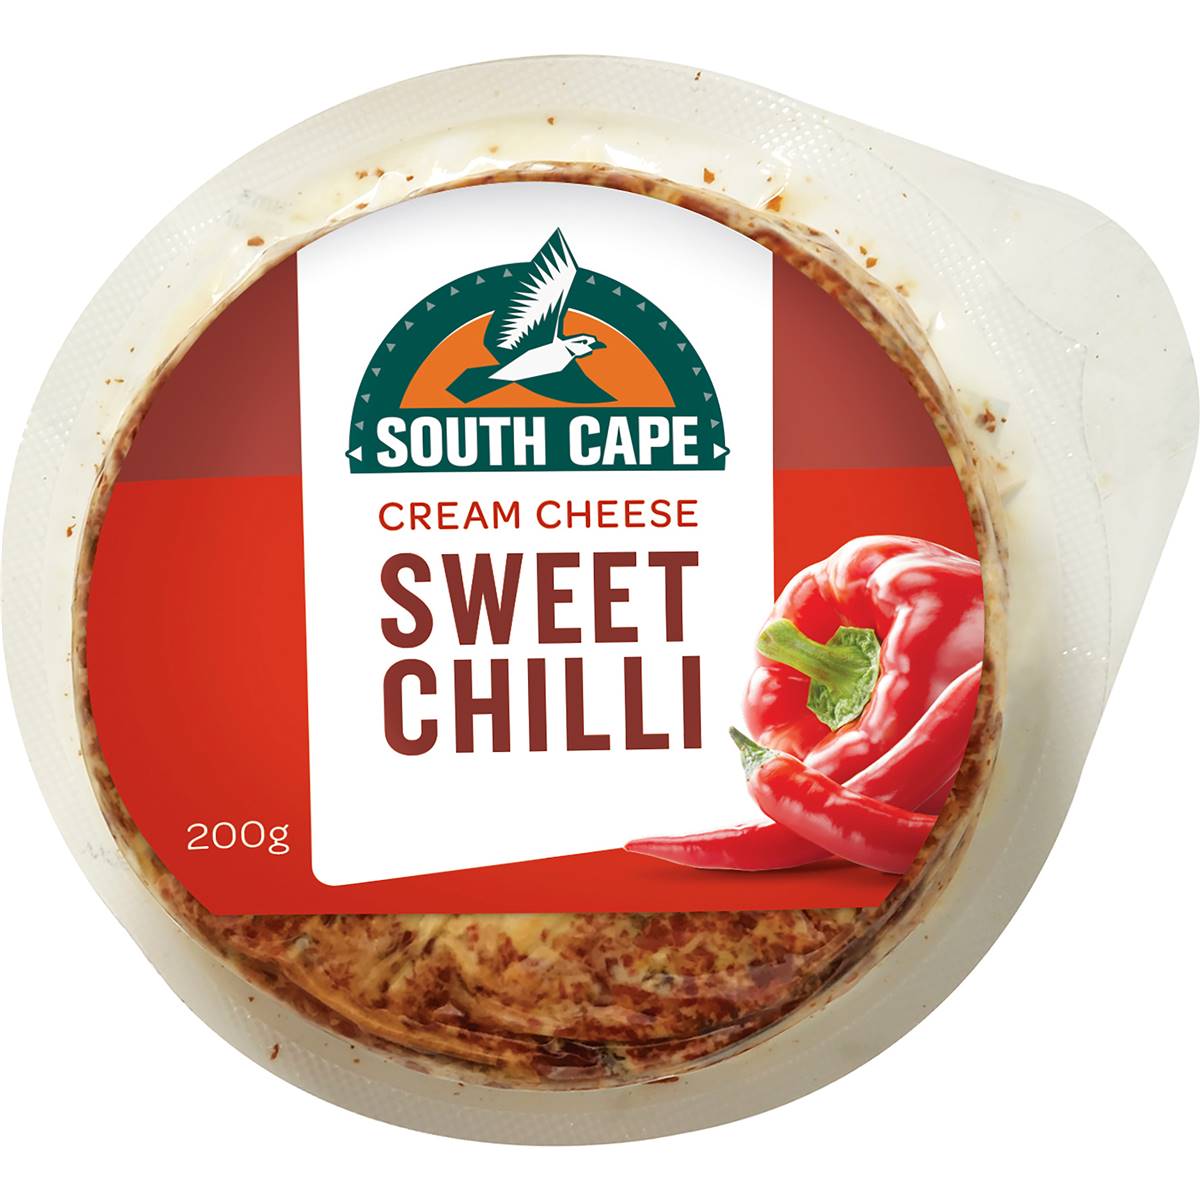 South Cape Sweet Chilli Cream Cheese 200g